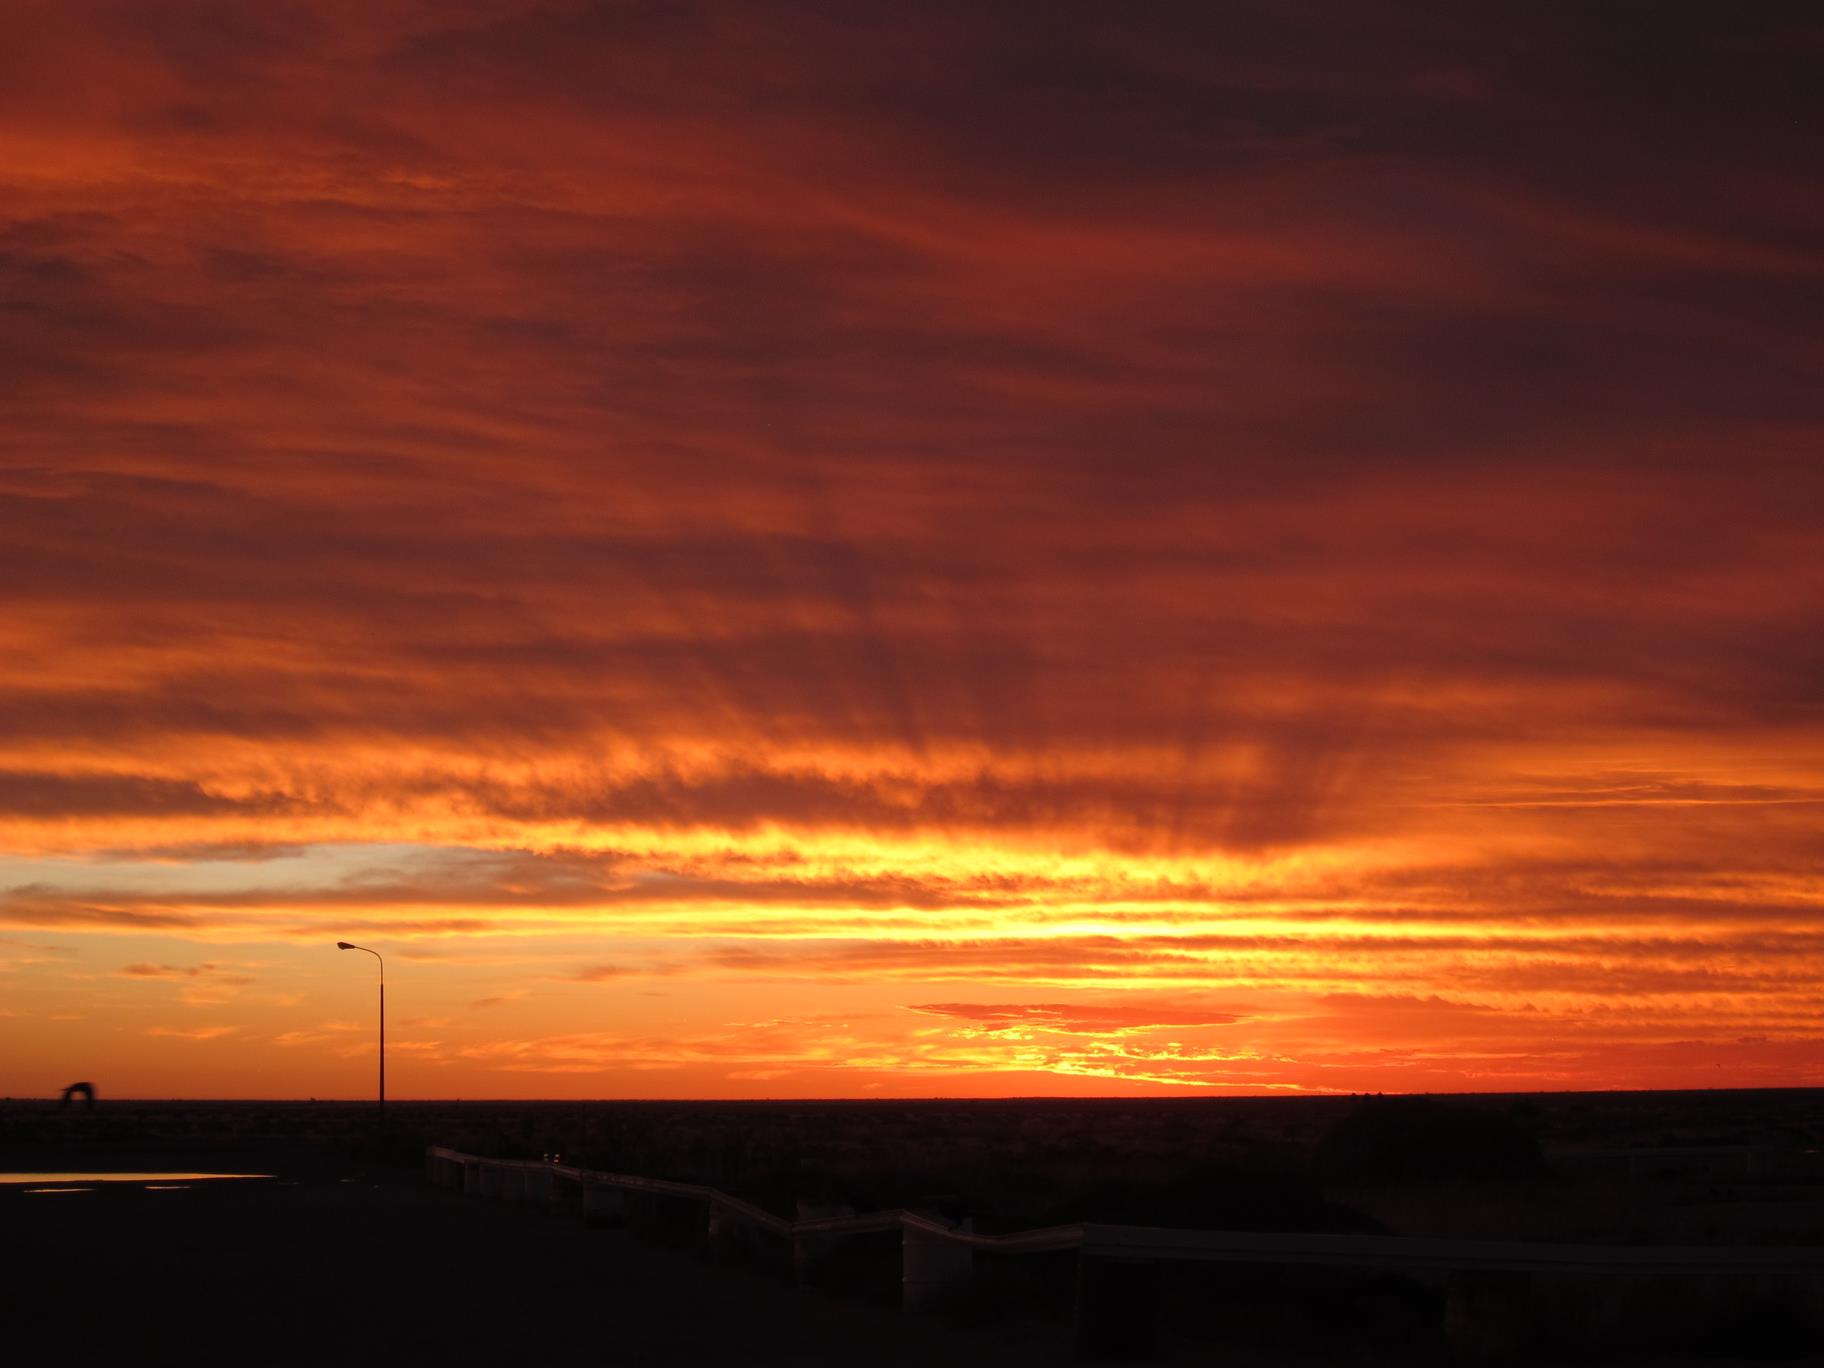 Sunset at the Nullarbor roadhouse